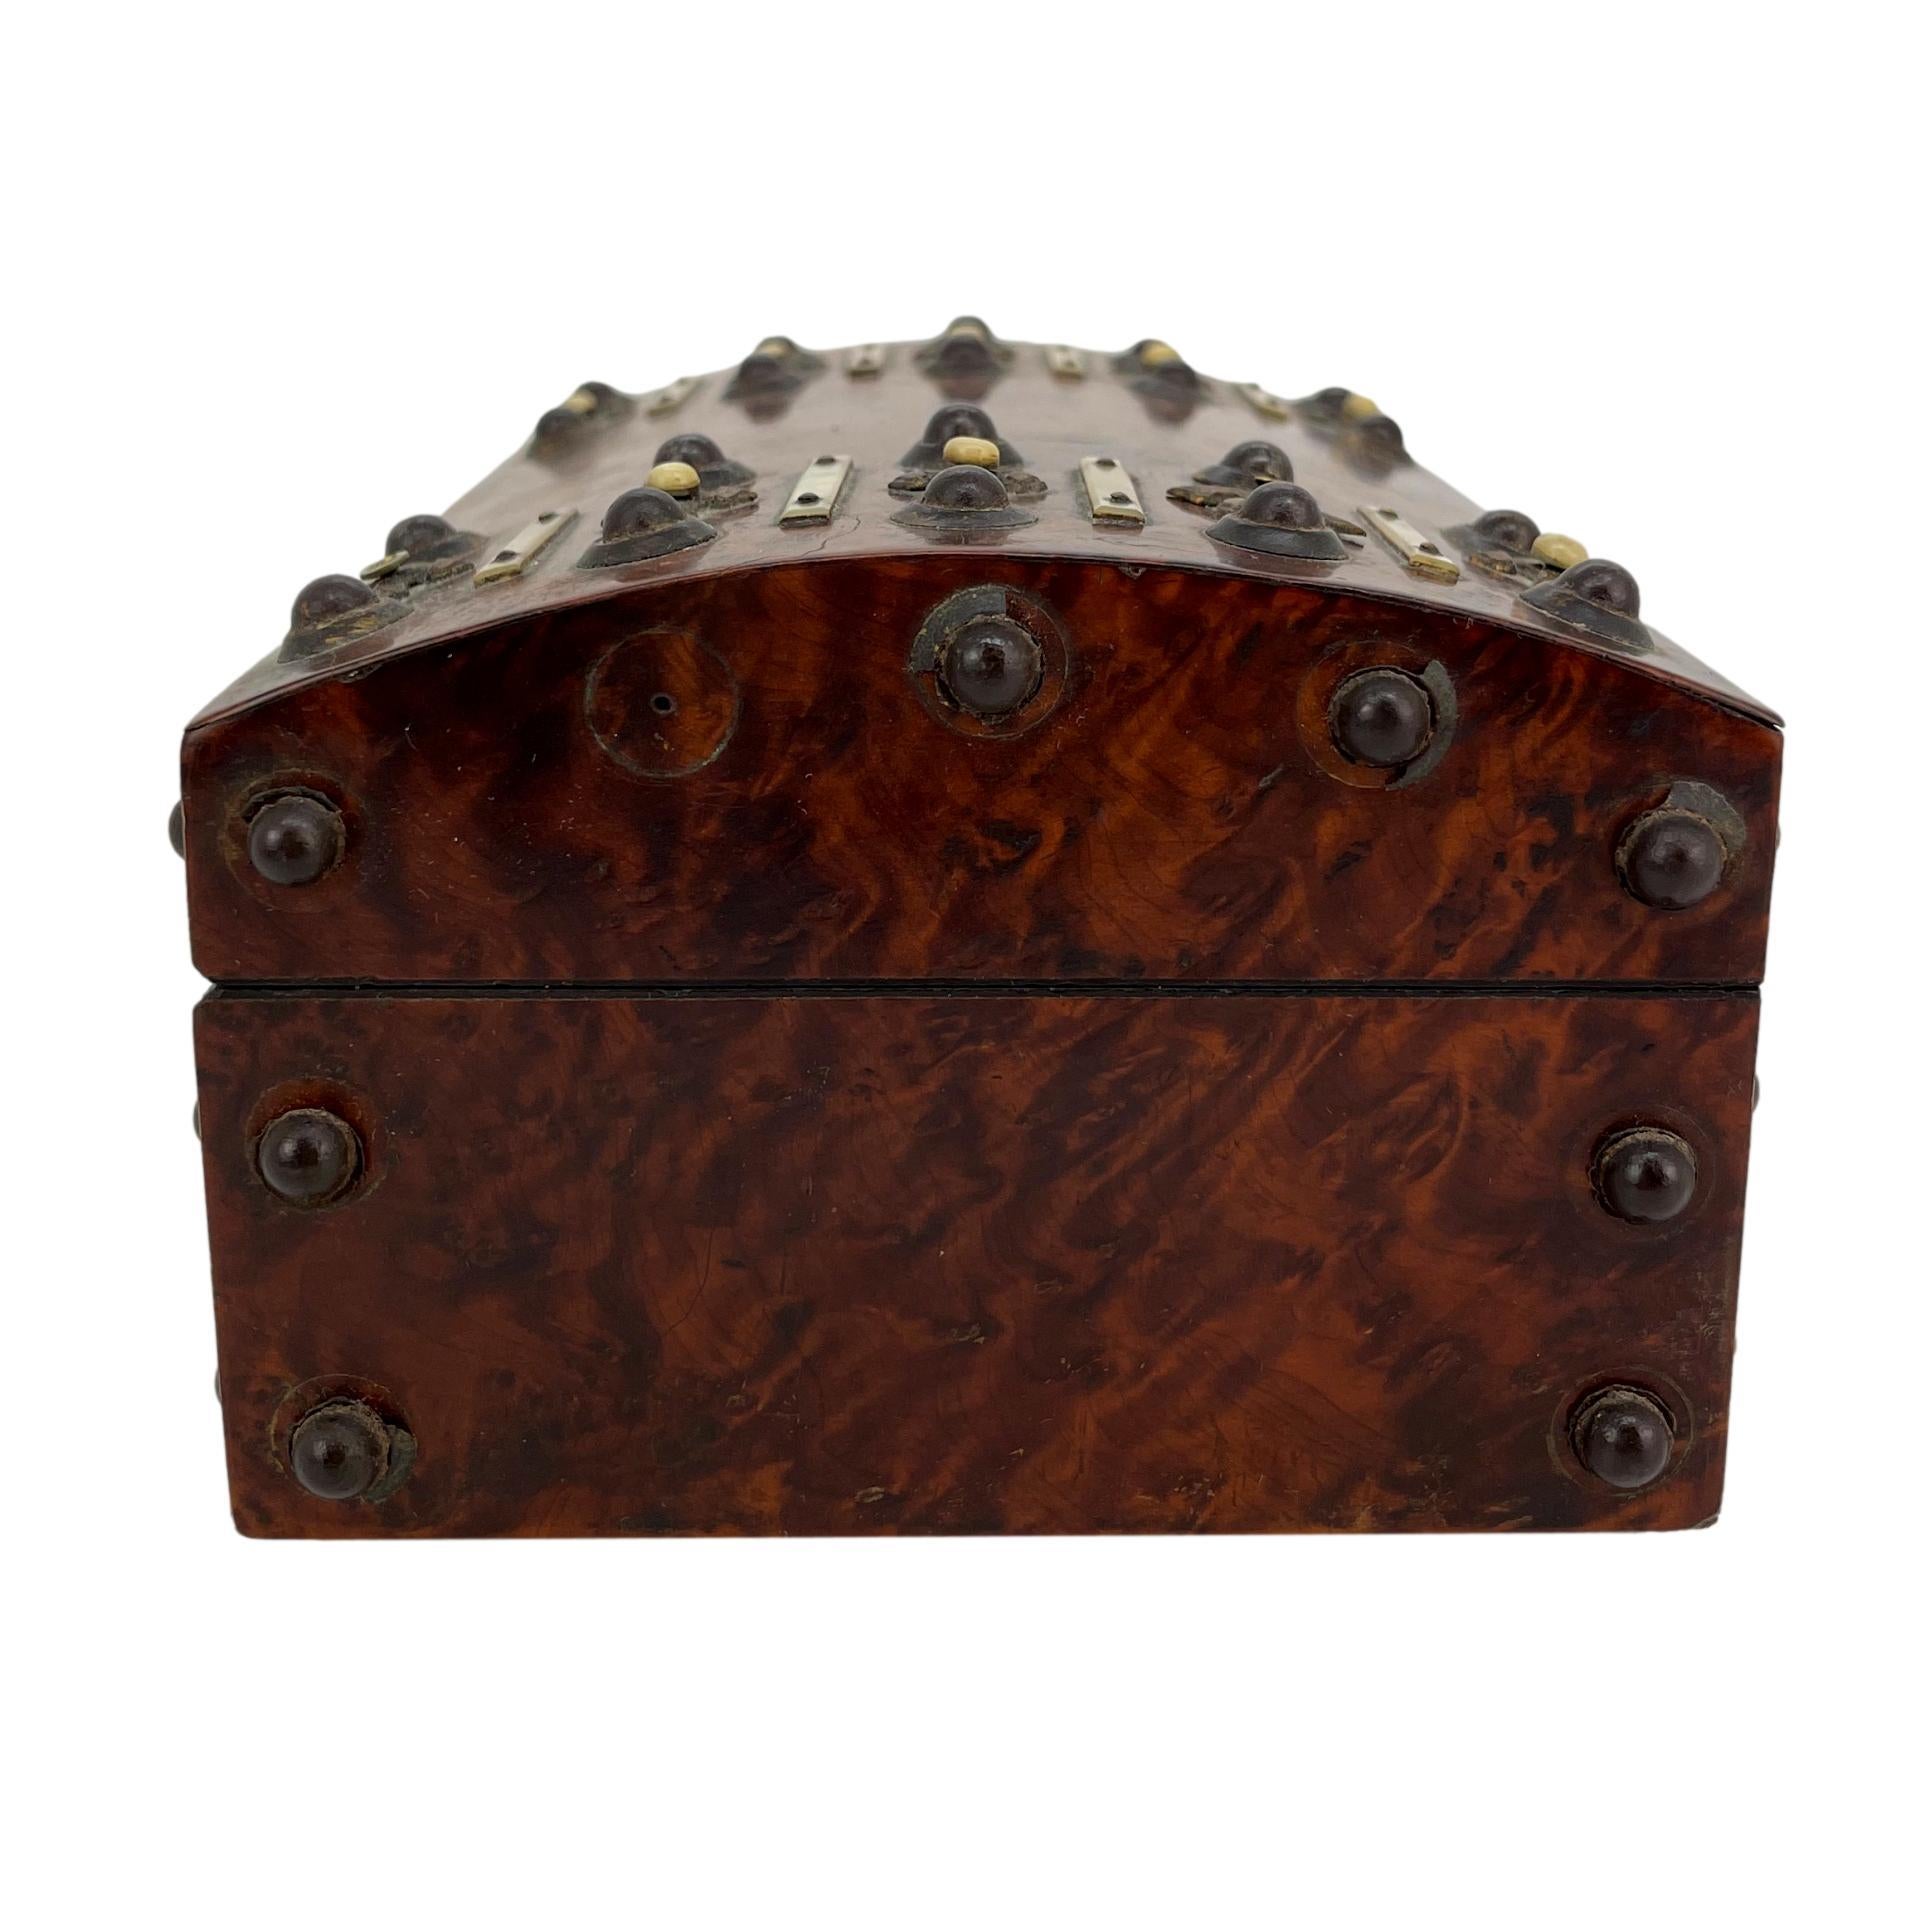 Burl Walnut and Brass Dome-Top Box with Mother-of-Pearl, English, ca. 1860 In Good Condition For Sale In Banner Elk, NC